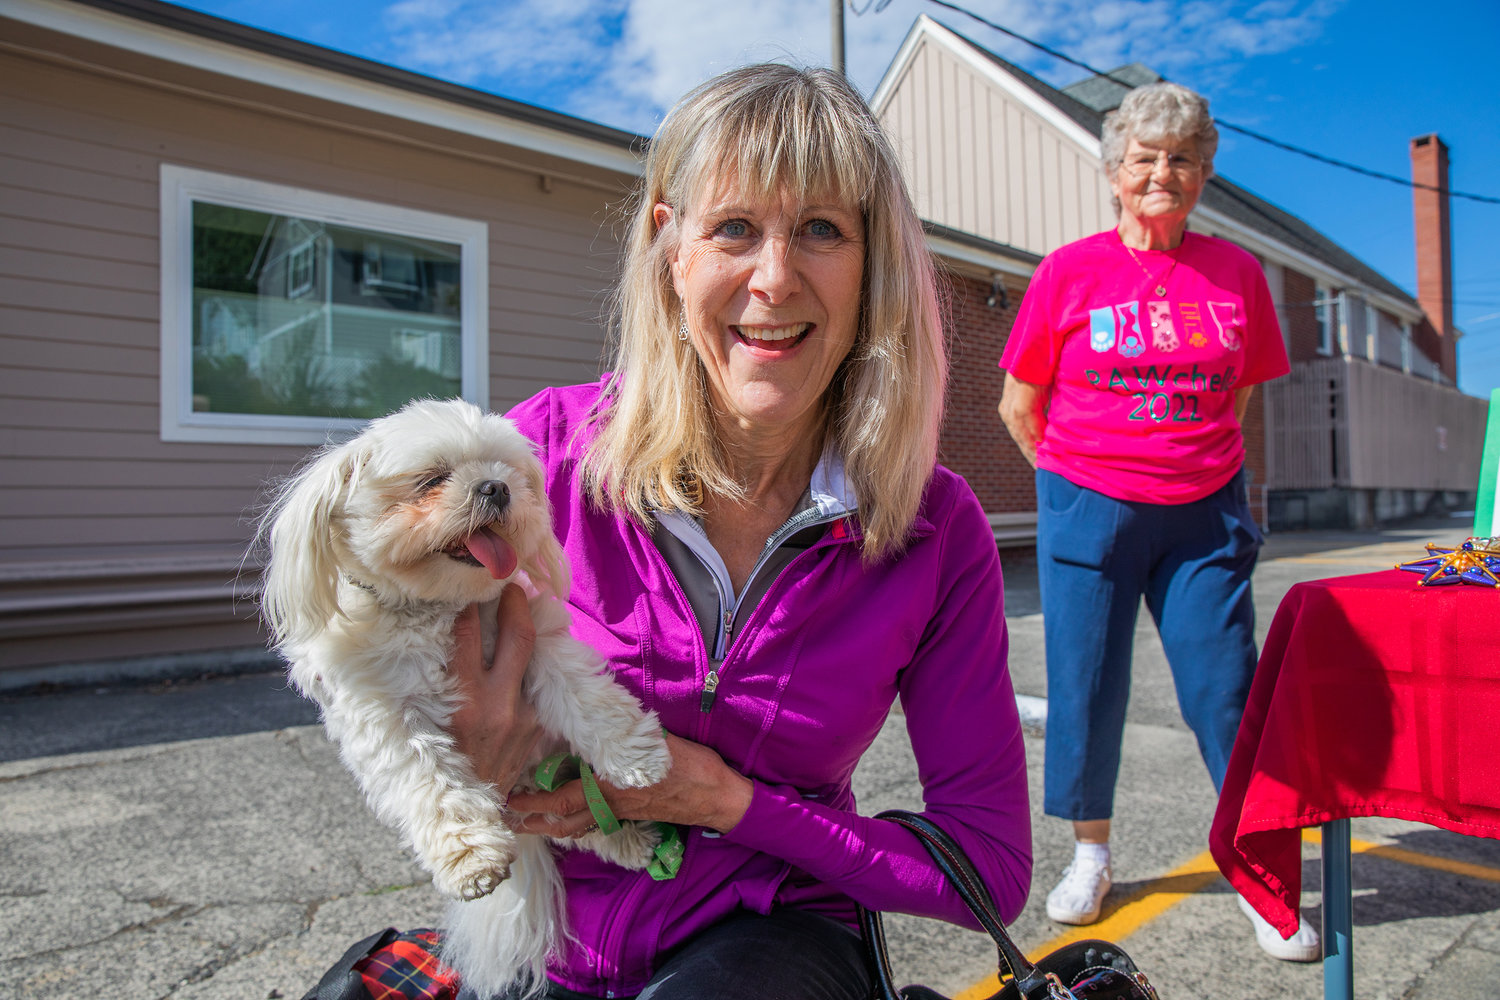 Valerie Sullivan, of Centralia, smiles while holding Cricket, a Maltese, during the “Blessing of the Animals” at Chehalis United Methodist Church on Saturday.